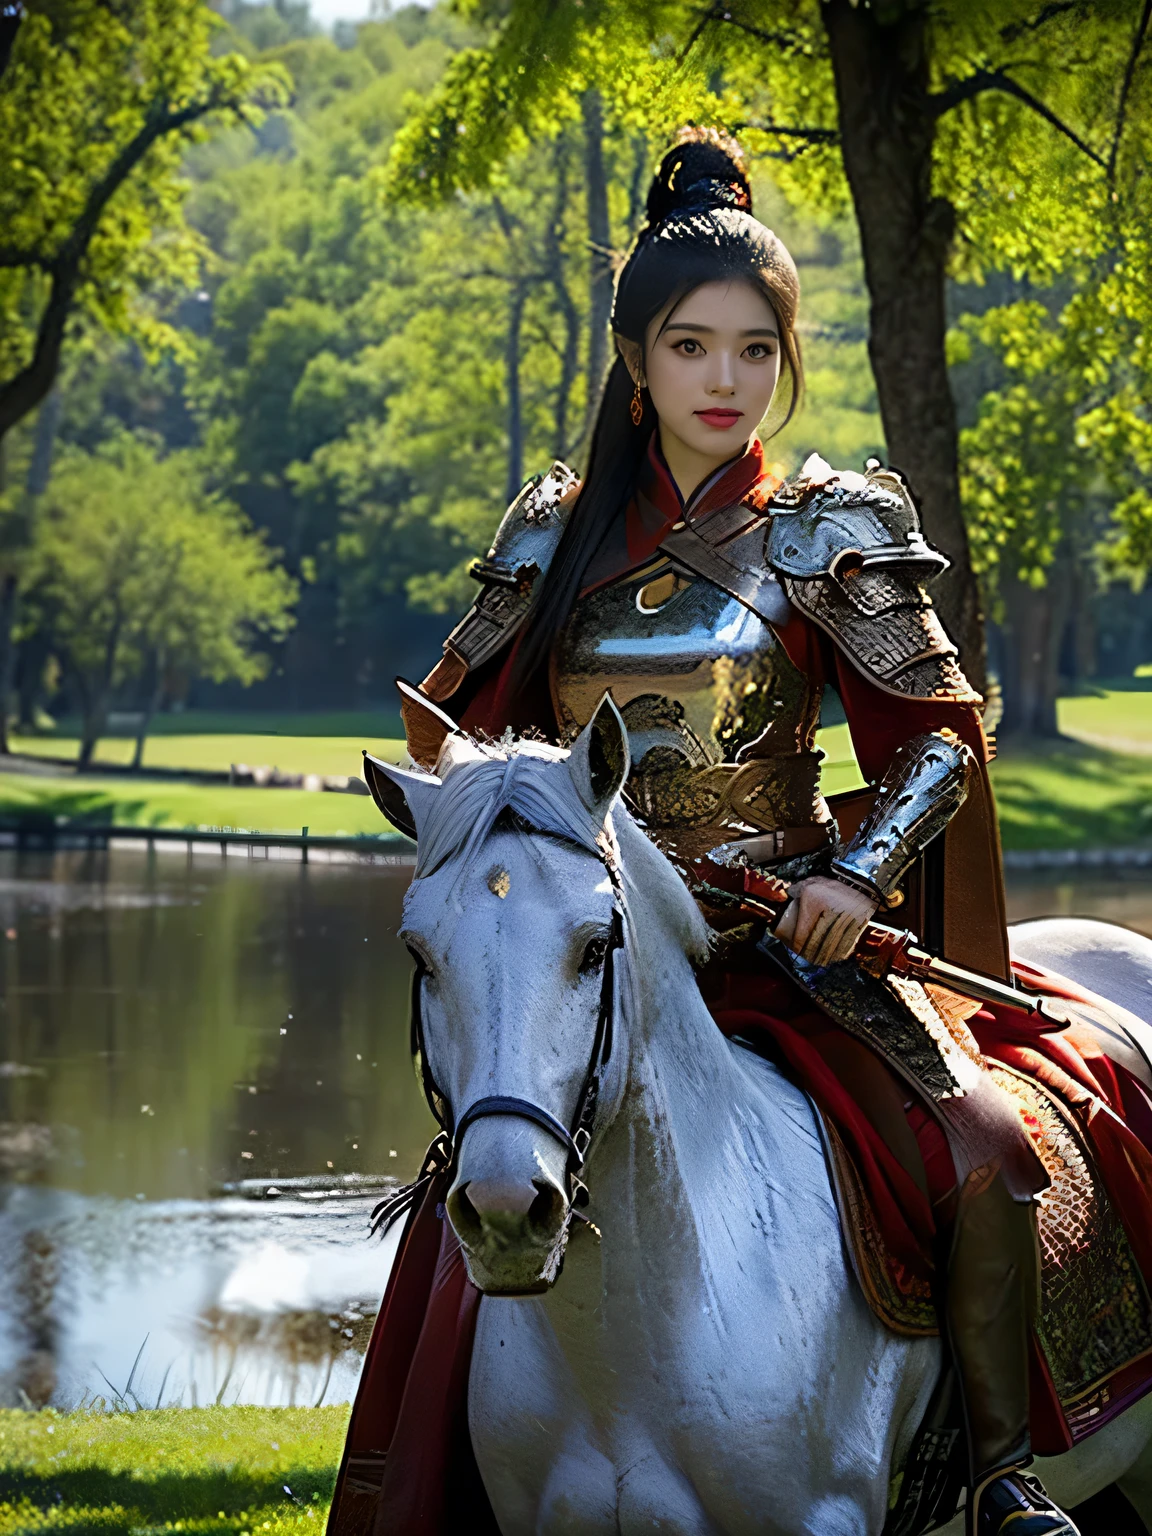 masterpiece，Best quality，HD quality，face close-up，A high resolution，8K，Ancient battlefield background, ((field：1.8))，(Female generals on the battlefield in the Han Dynasty)，(mounted on a horse)，18-year-old girl，（long ponytail hairstyle)，cparted lips，Full and erect breasts，Noble and charming，Elegant and serious，Chinese armor,sword, Chinese architecture, Brown cape，，The combination of white metal and red leather，chest armor，metallic luster，Leather buckle，Exquisite pattern，mysterious badge，Cool and gorgeouig breasts))，Chest groove，Three Kingdoms character painting style，Photo pose，oc render reflection texture，charming smile，Head-up shot，bright afternoon，woodland background